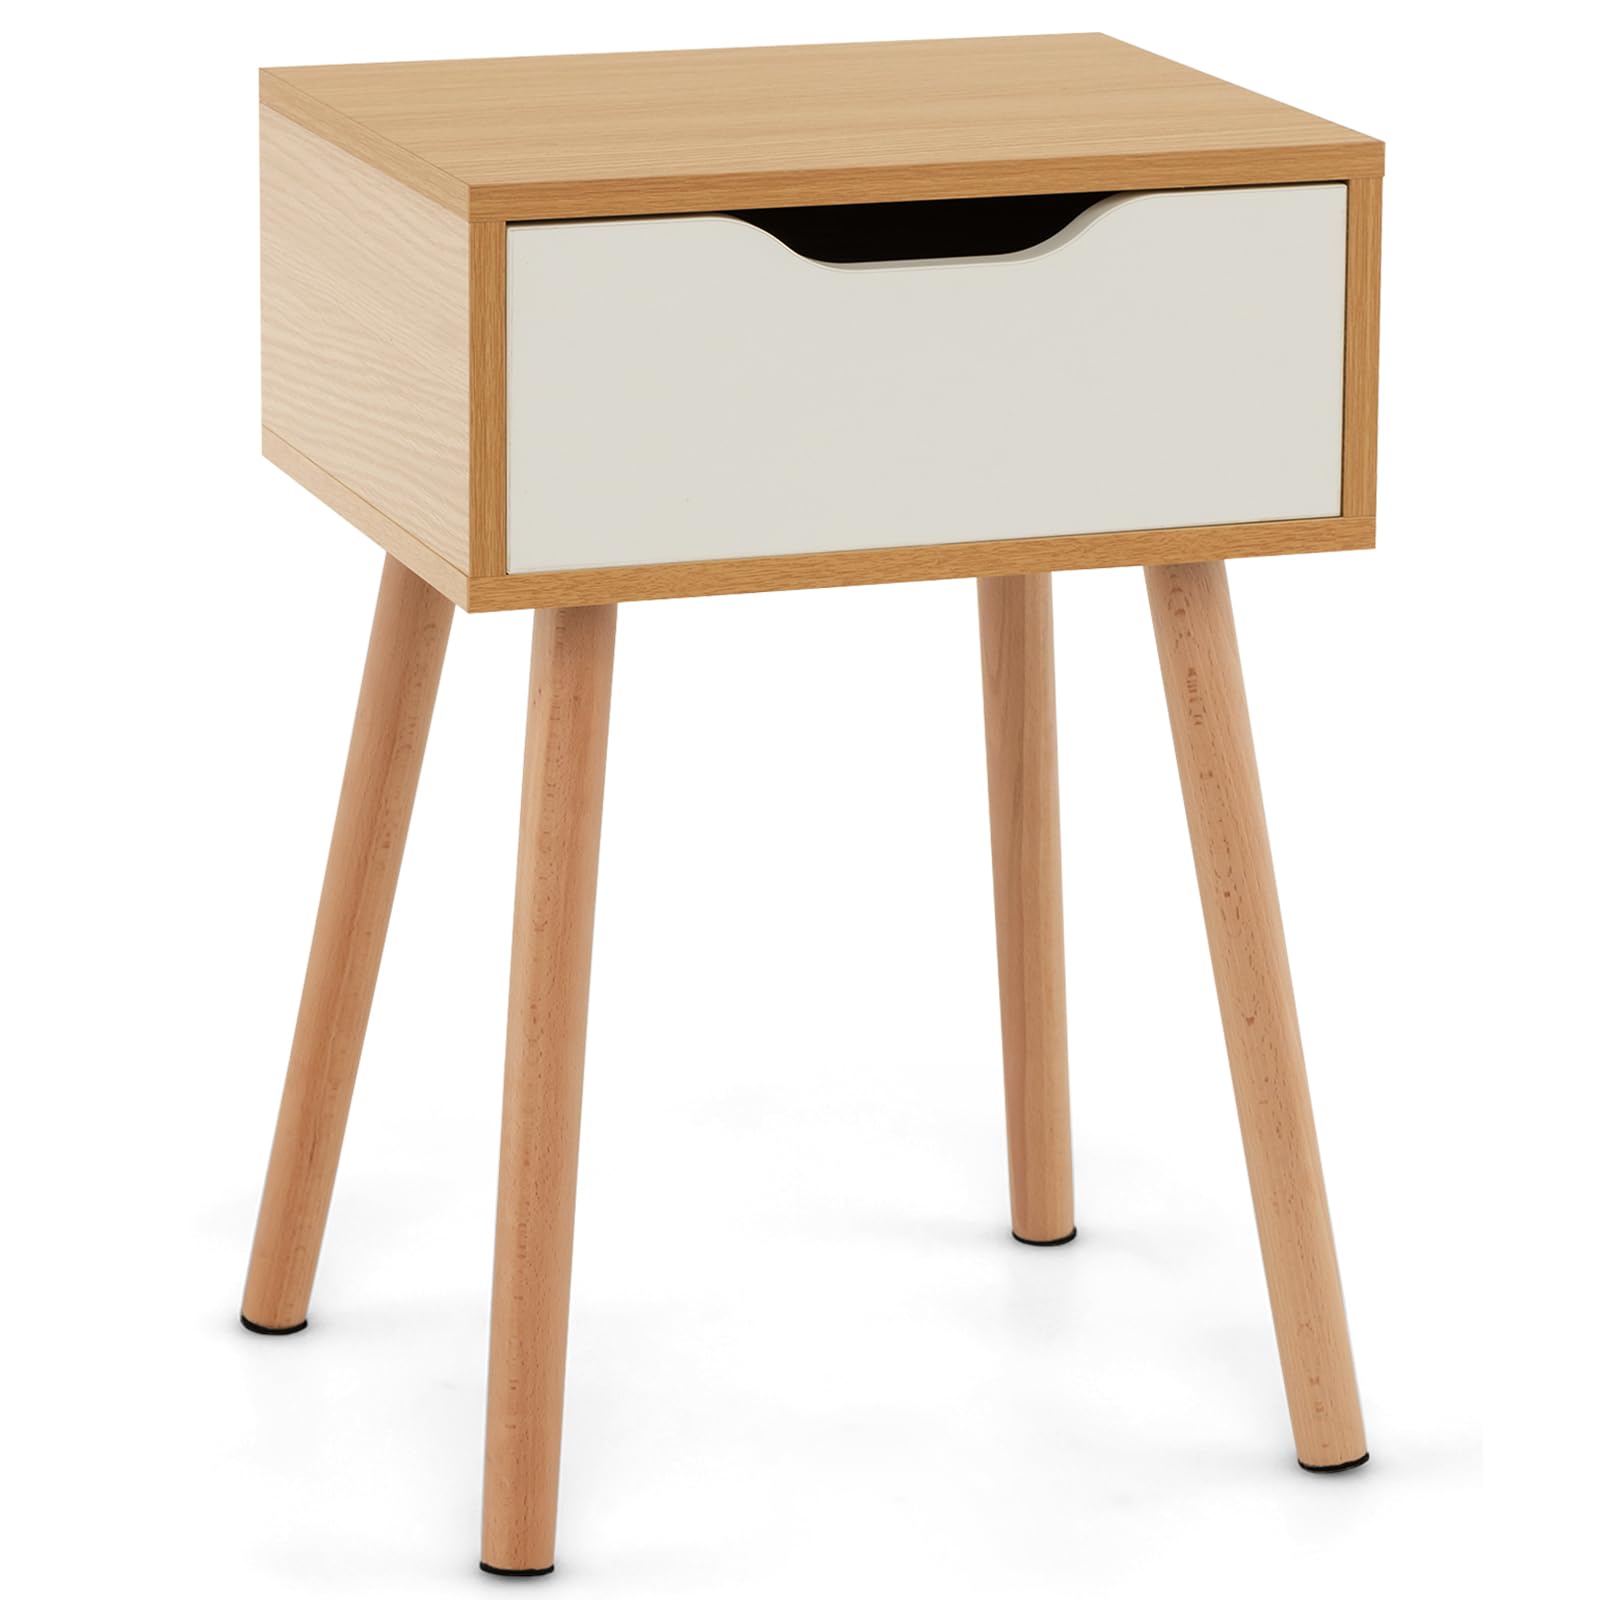 Giantex Mid Century Modern Nightstand, Wooden Bedside Table with Storage Drawer